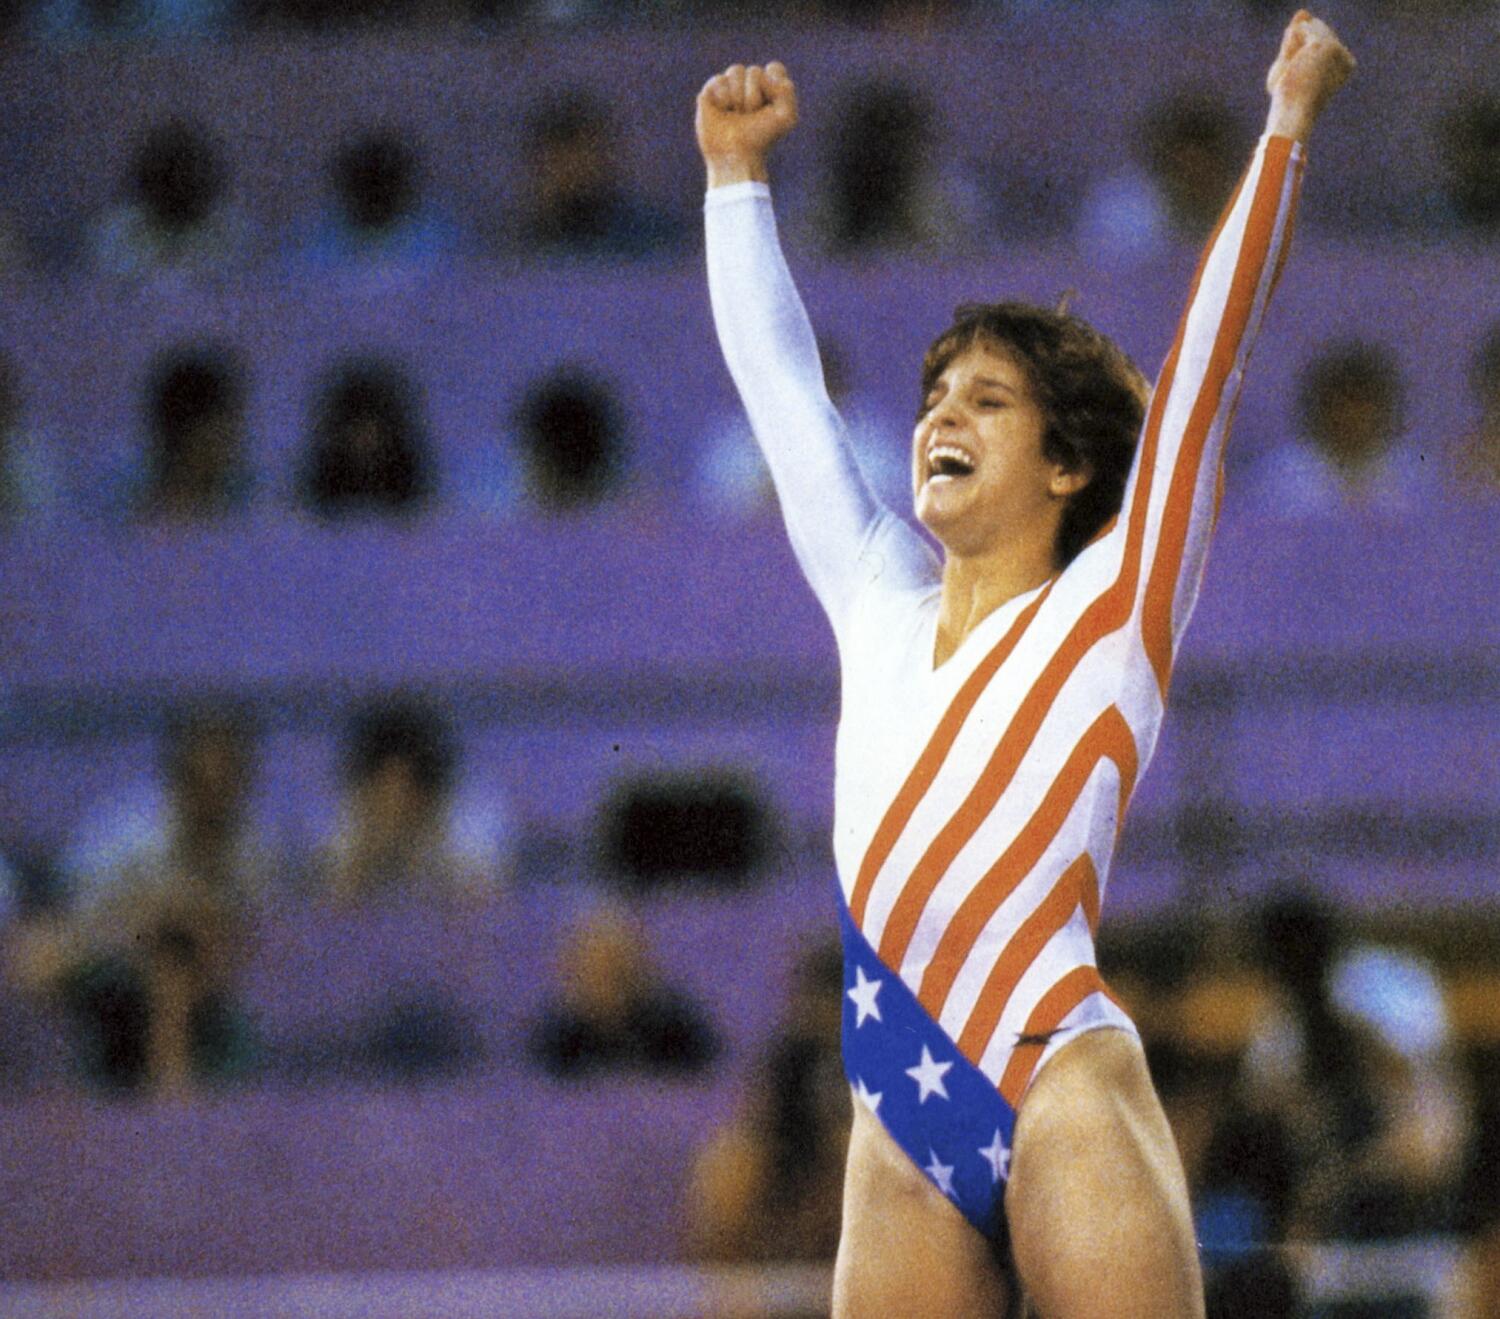 Mary Lou Retton is hospitalized with  pneumonia, unable to breathe on her own, daughter says